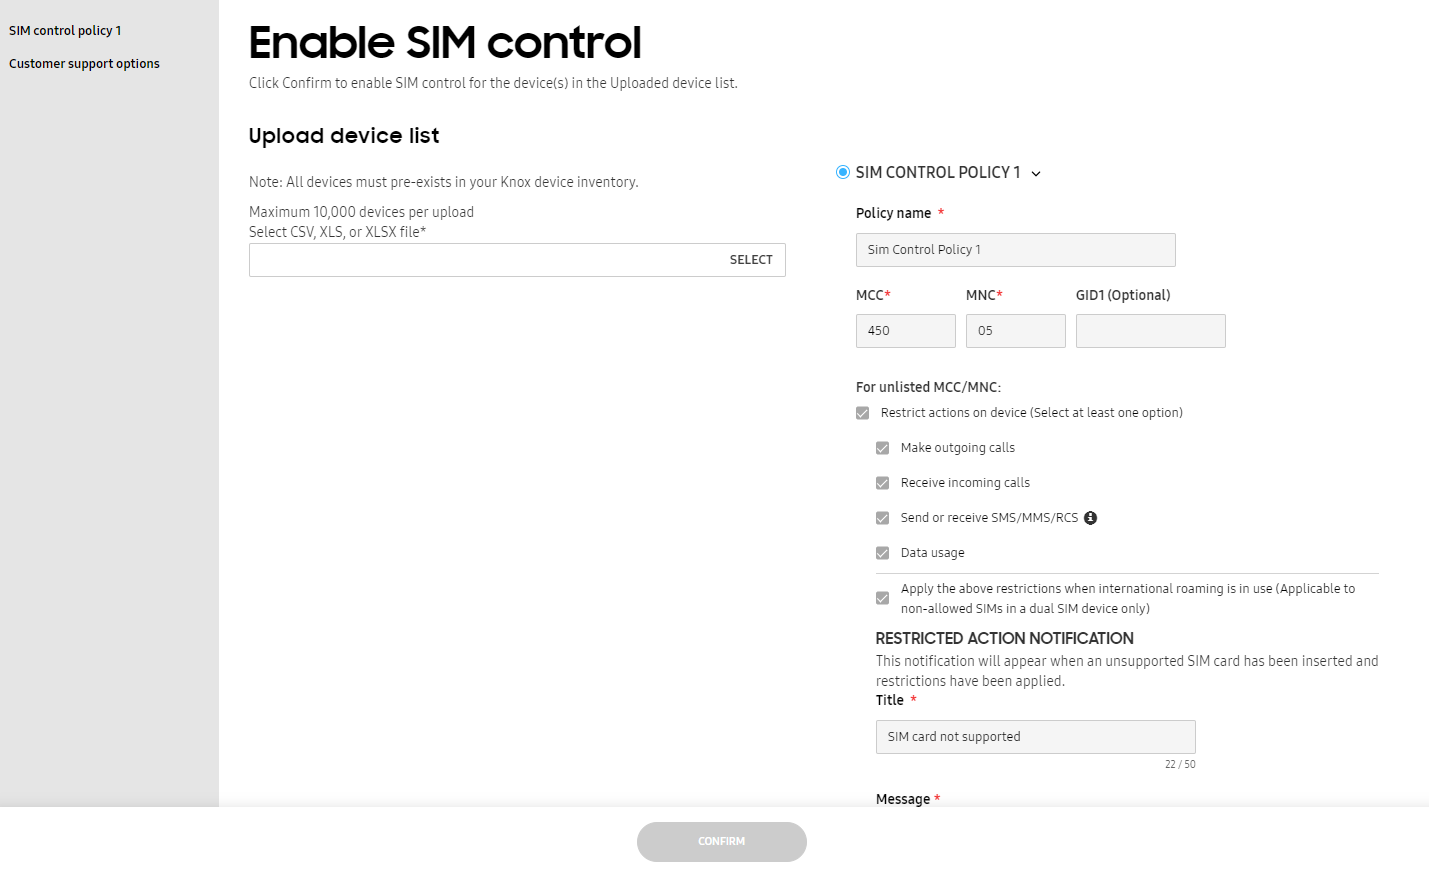 Enable SIM control screen showing option to upload a CSV, XLS or XLSX file